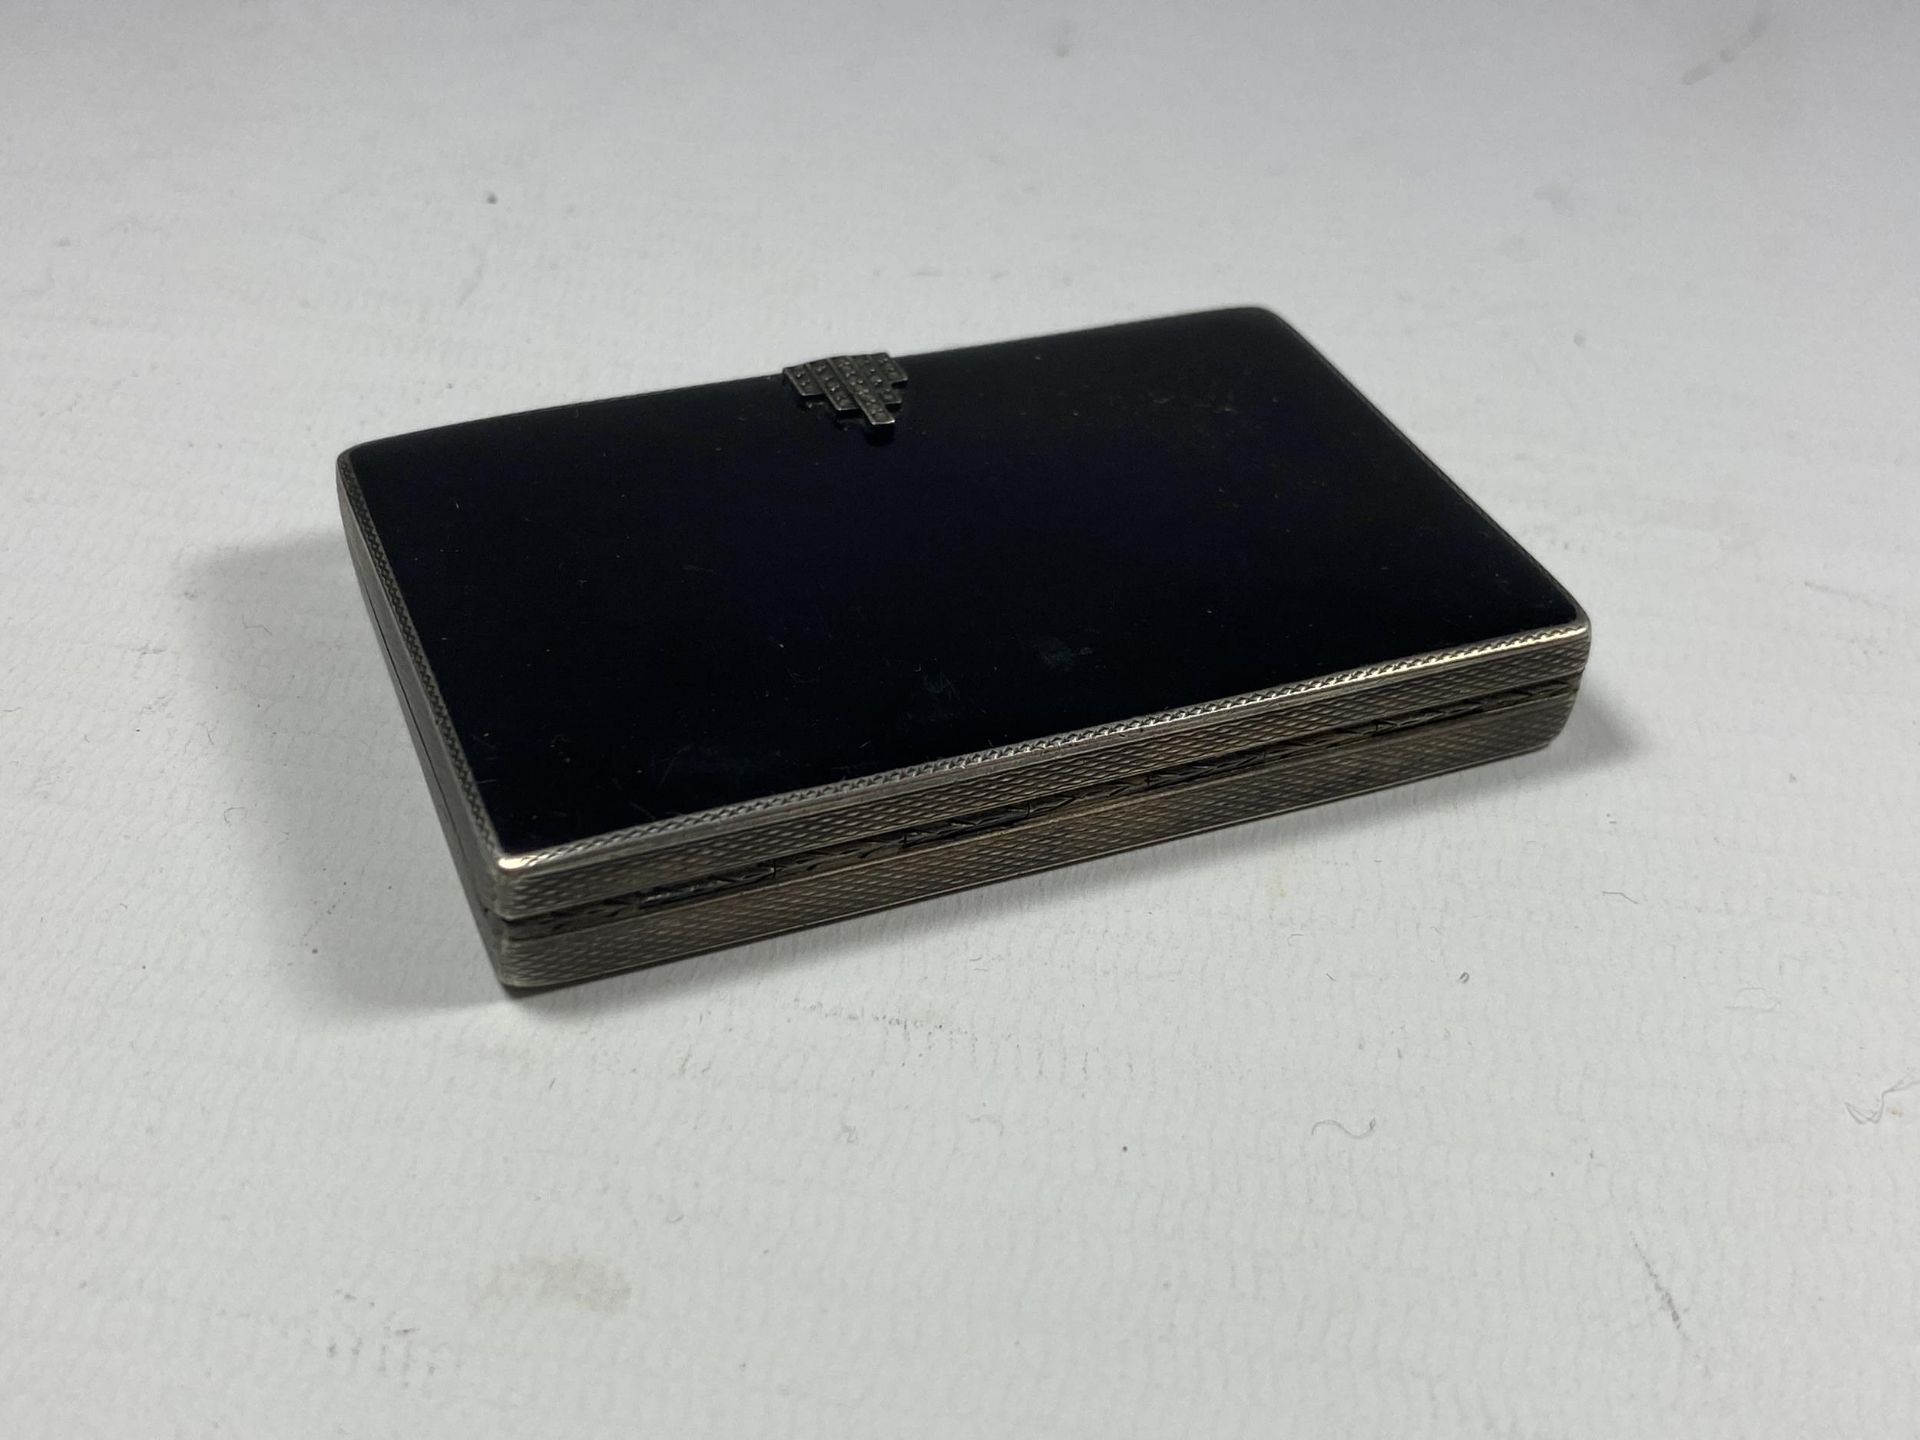 AN ART DECO .925 HALLMARKED SILVER CARD CASE, IMPORT HALLMARKS TO INTERIOR, LENGTH 8CM - Image 2 of 5